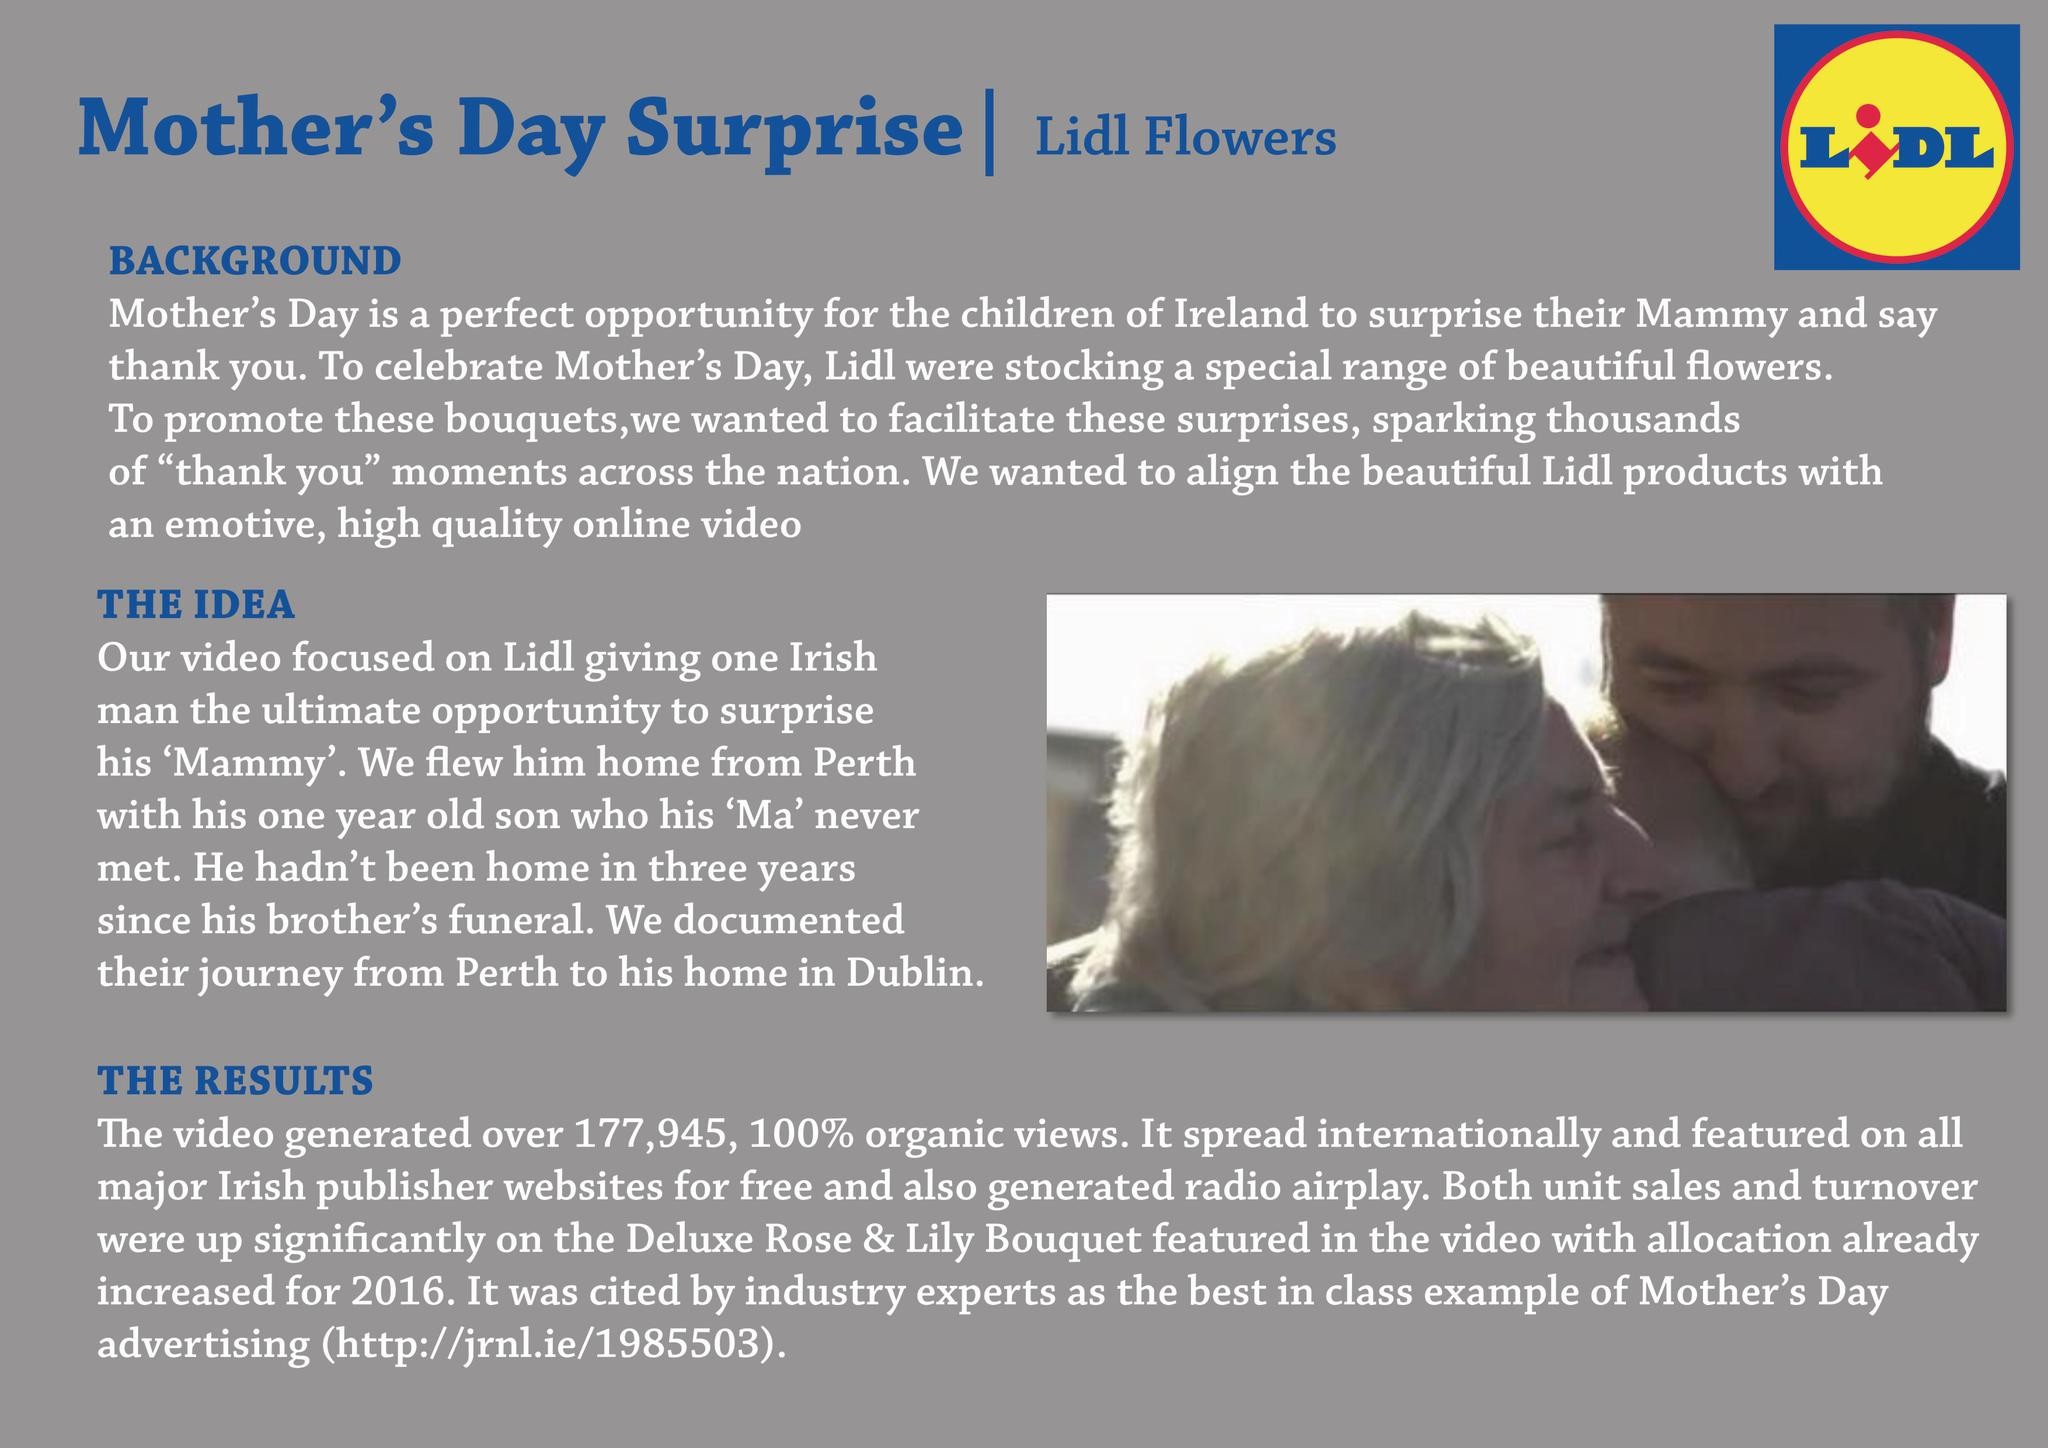 MOTHER'S DAY SURPRISE